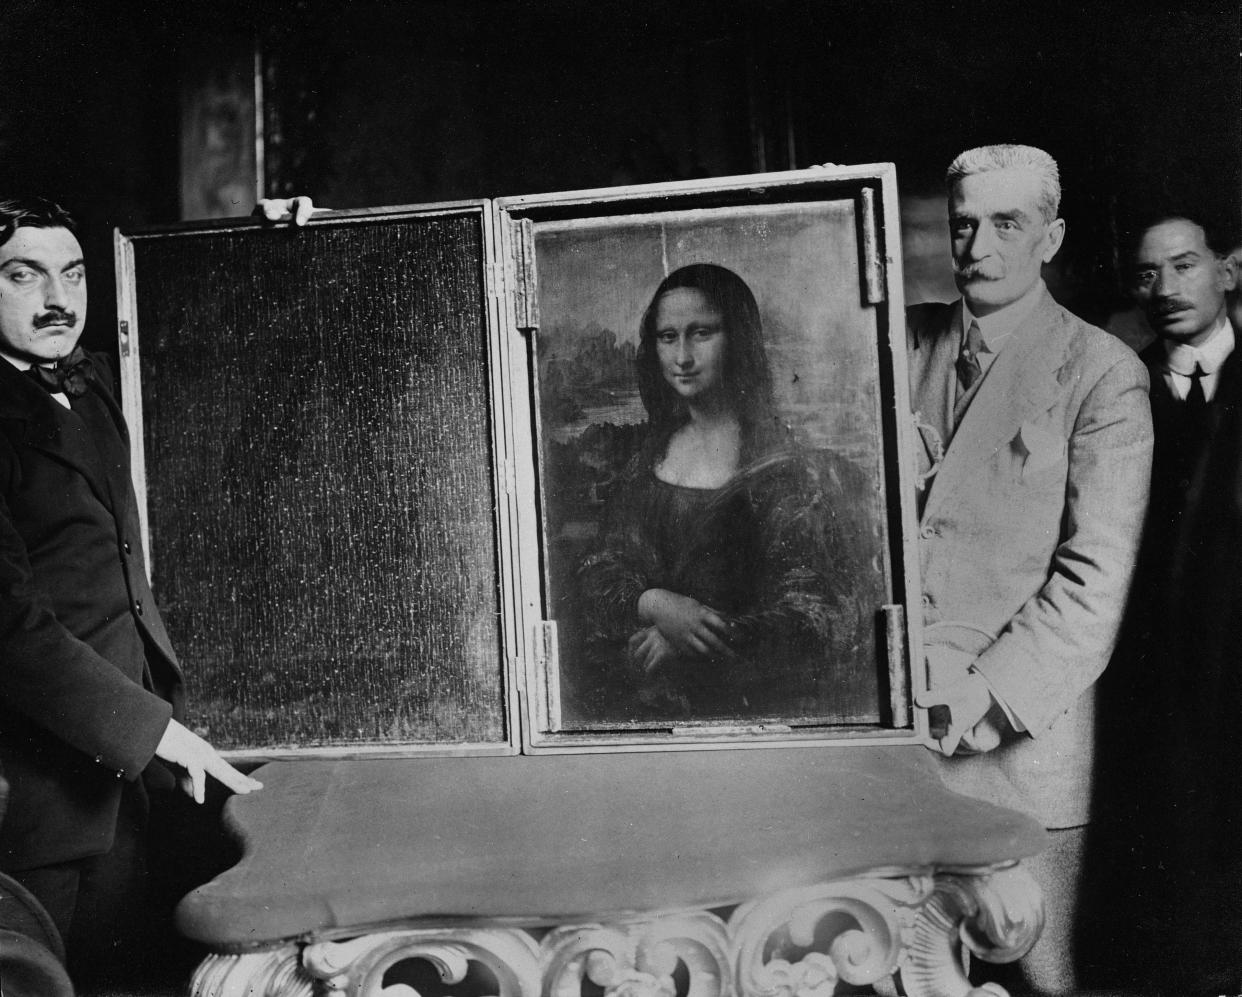 PARIS – 1914: Two men carry the painting of the Mona Lisa back to the Louvre Museum in Paris, France. Vincenzo Peruggia committed the biggest art theft of the 20th century. (Photo by Roger-Viollet/Getty Images)